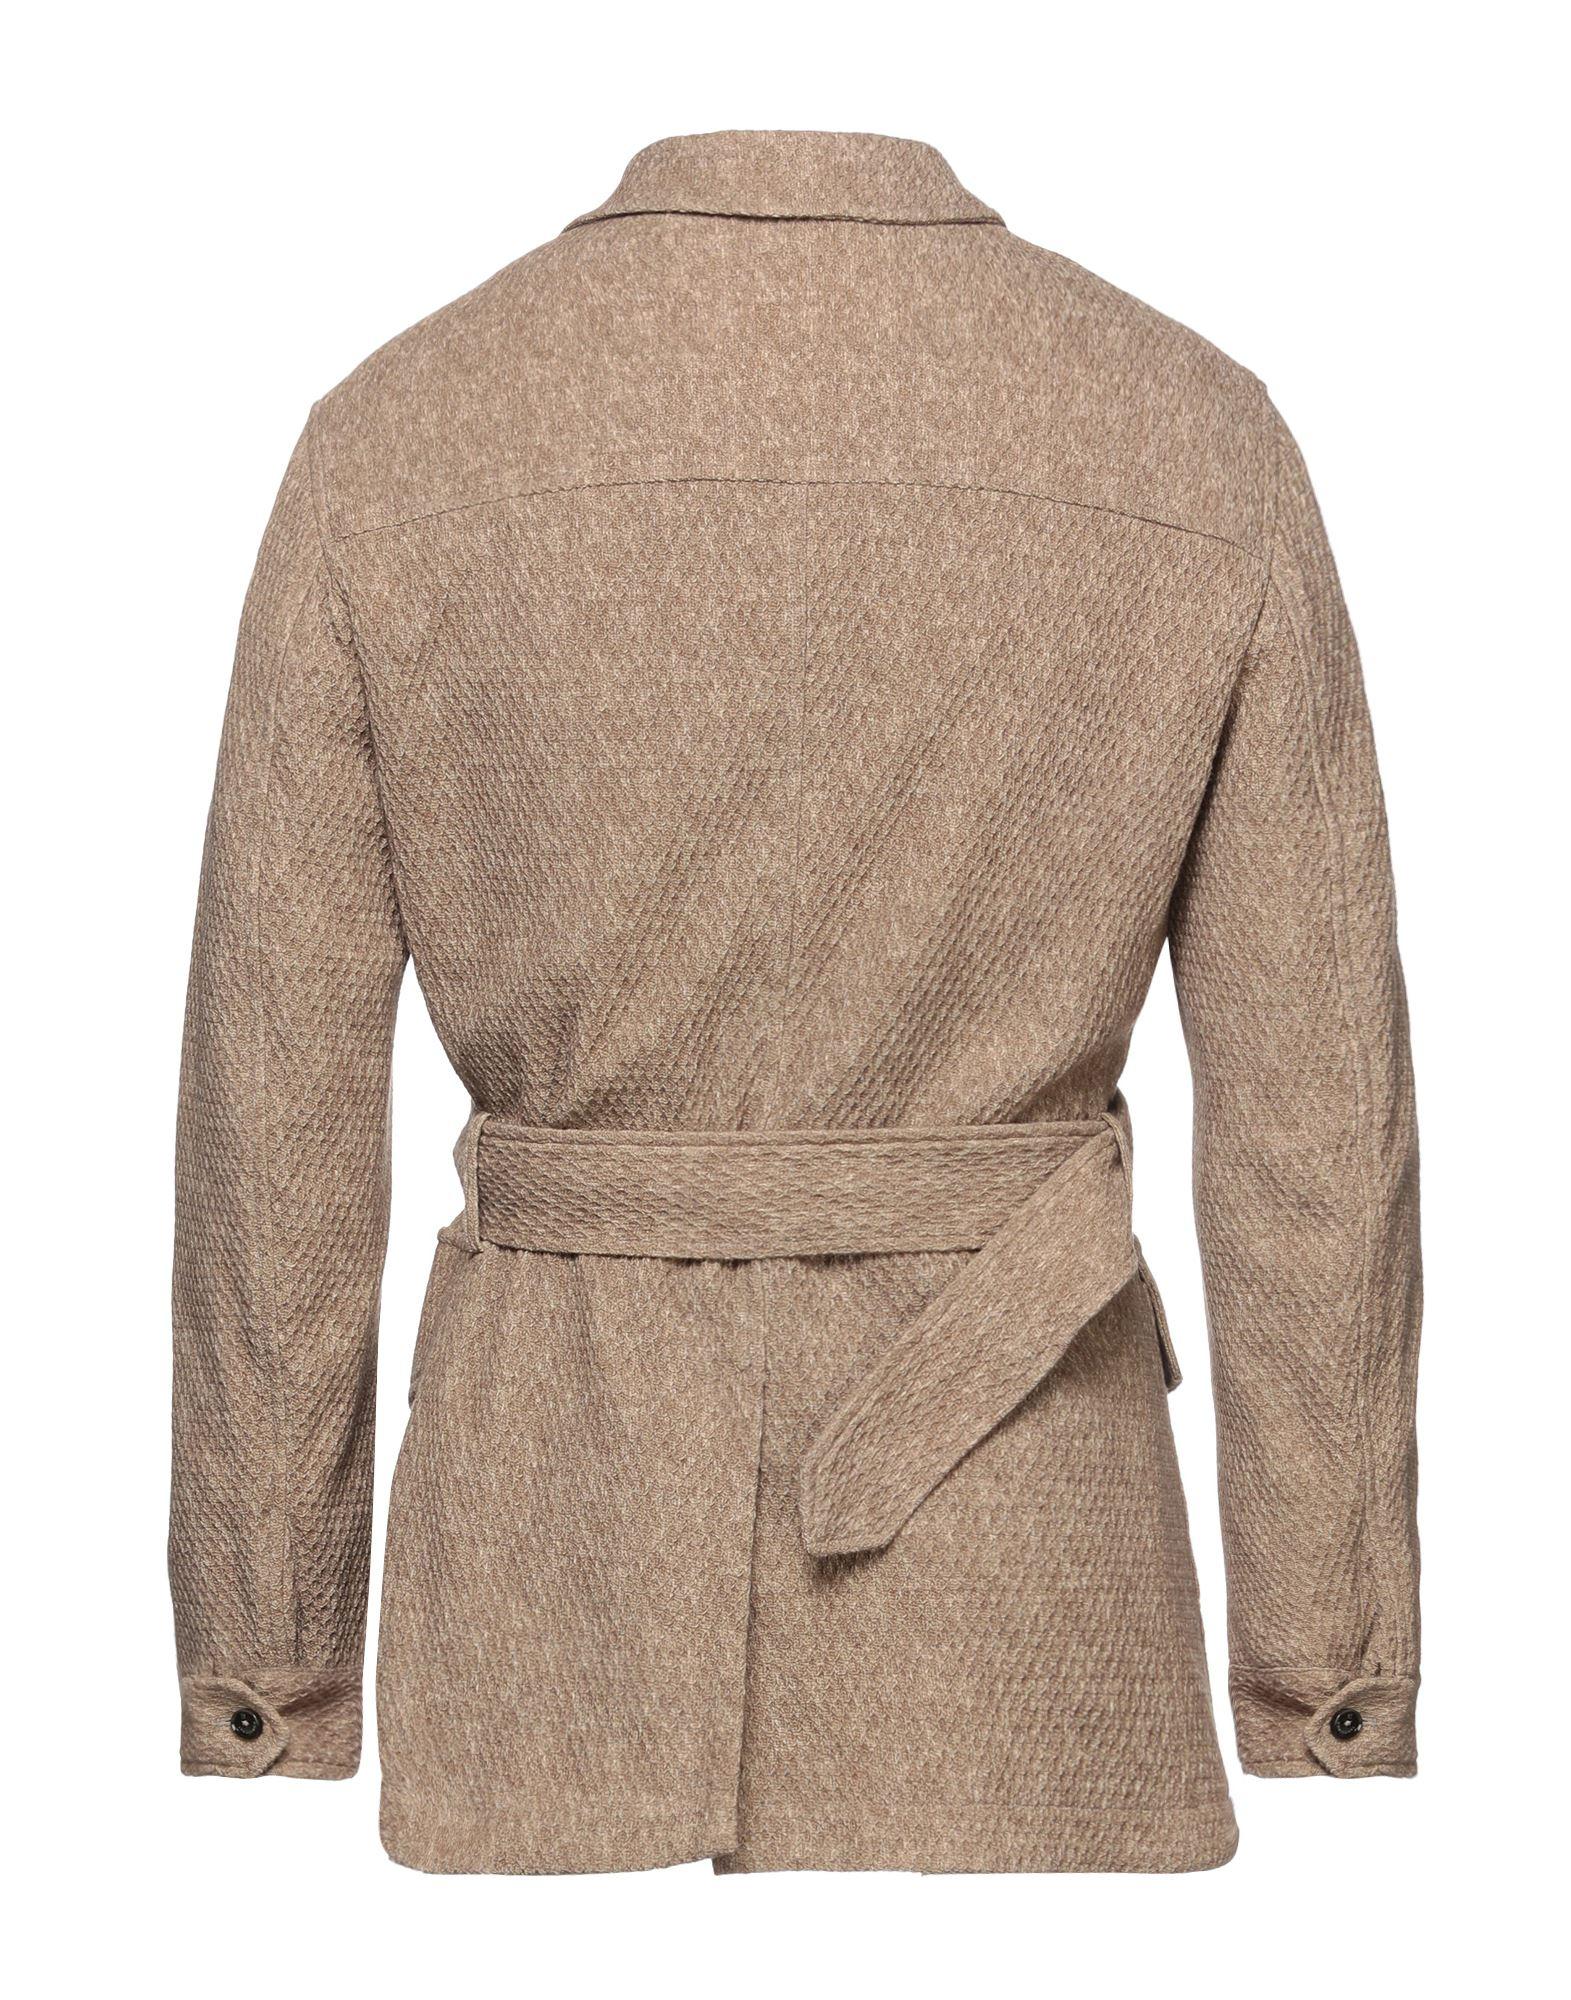 Montecore Cotton Jacket in Camel (Natural) for Men | Lyst